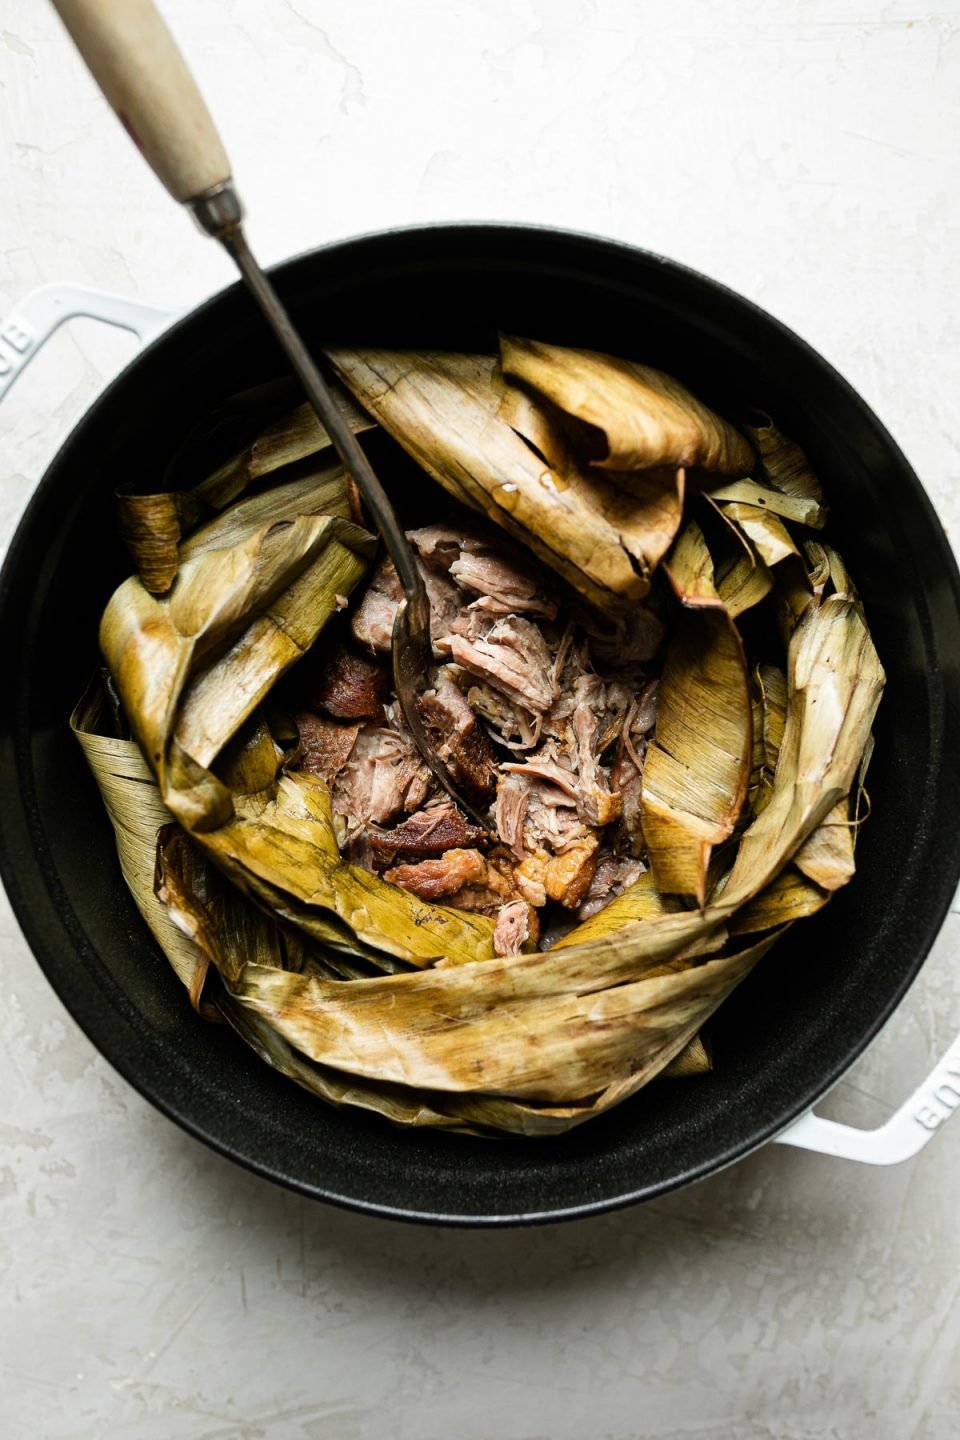 Shredded Kalua pig shown inside dried banana leaf in a white Dutch oven atop a creamy cement surface. A serving fork with a long wooden handle is inserted in the center of the pork.